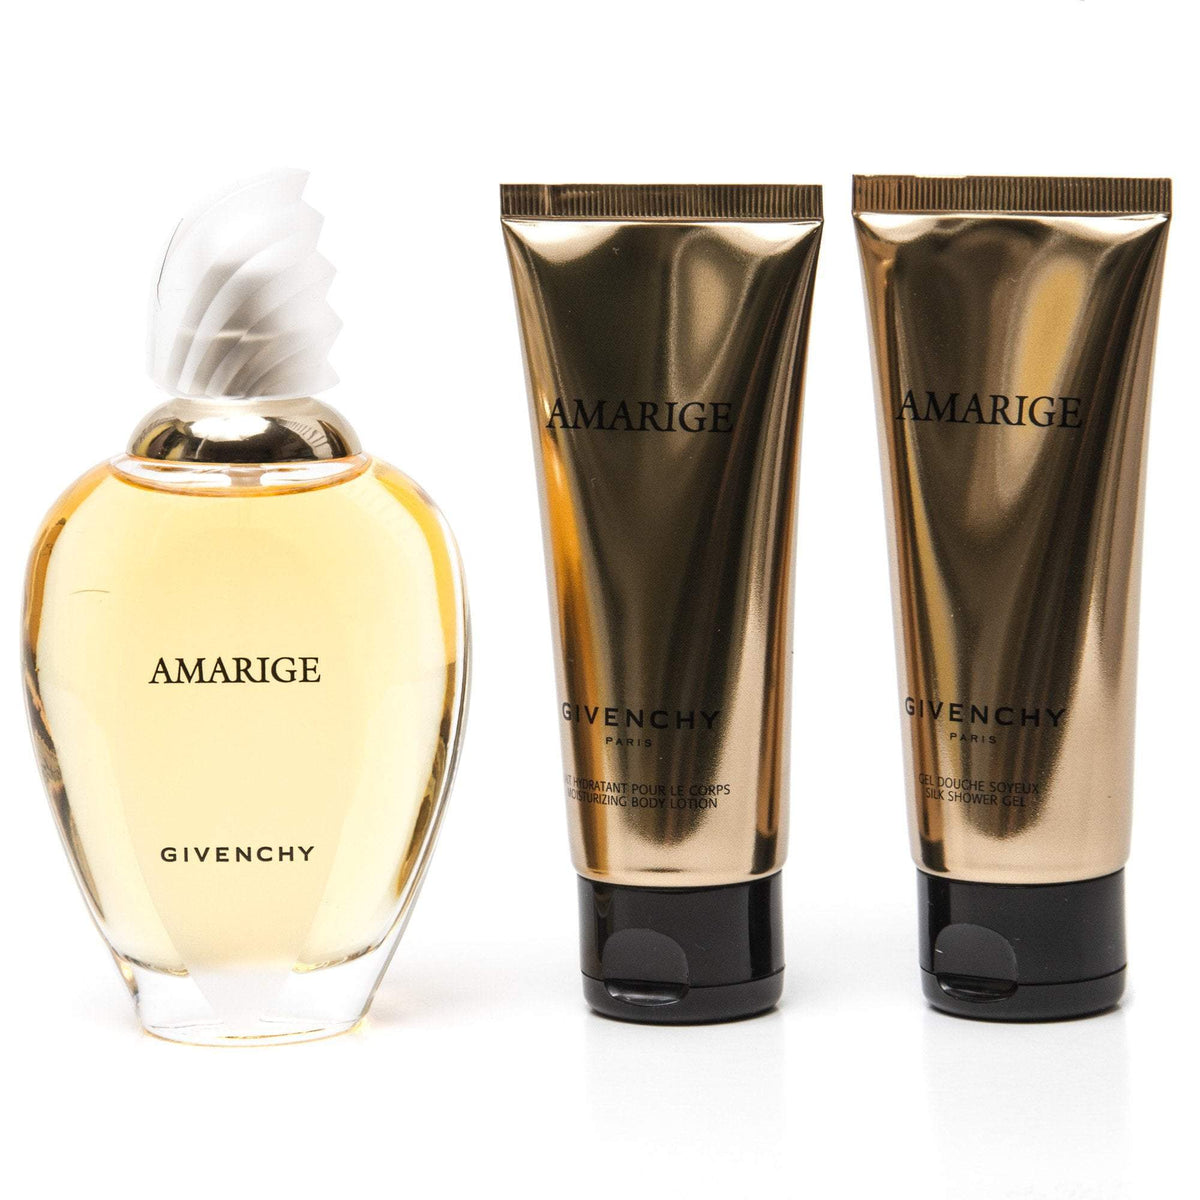 Amarige Gift Set for Women by Givenchy